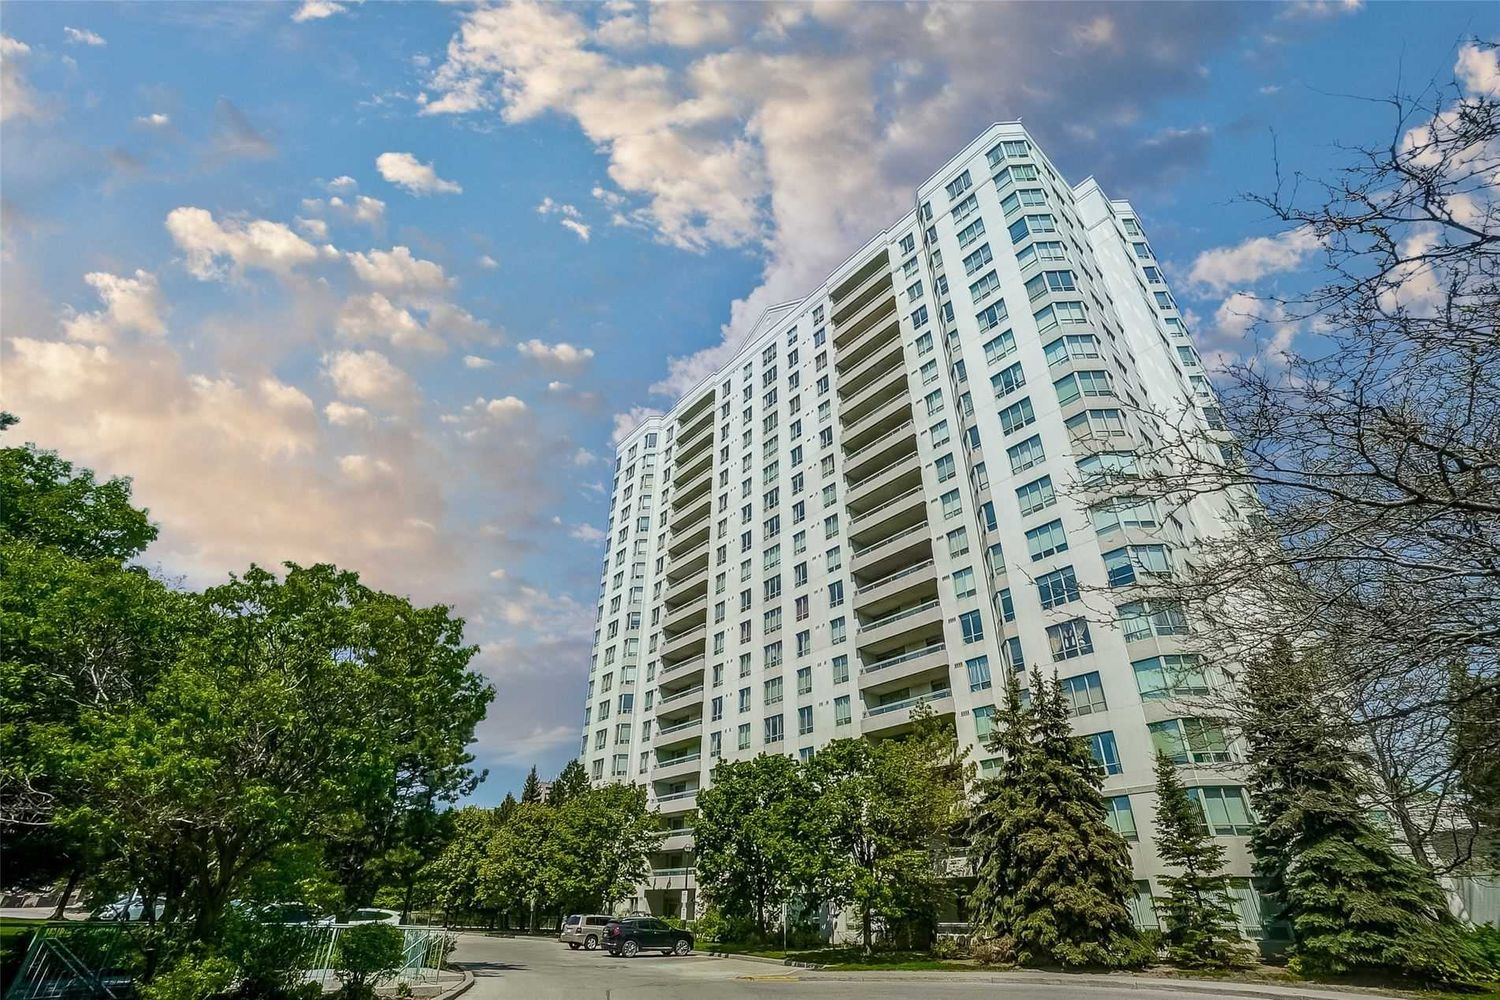 5001 Finch Avenue E. The Chartwell Condos is located in  Scarborough, Toronto - image #1 of 3